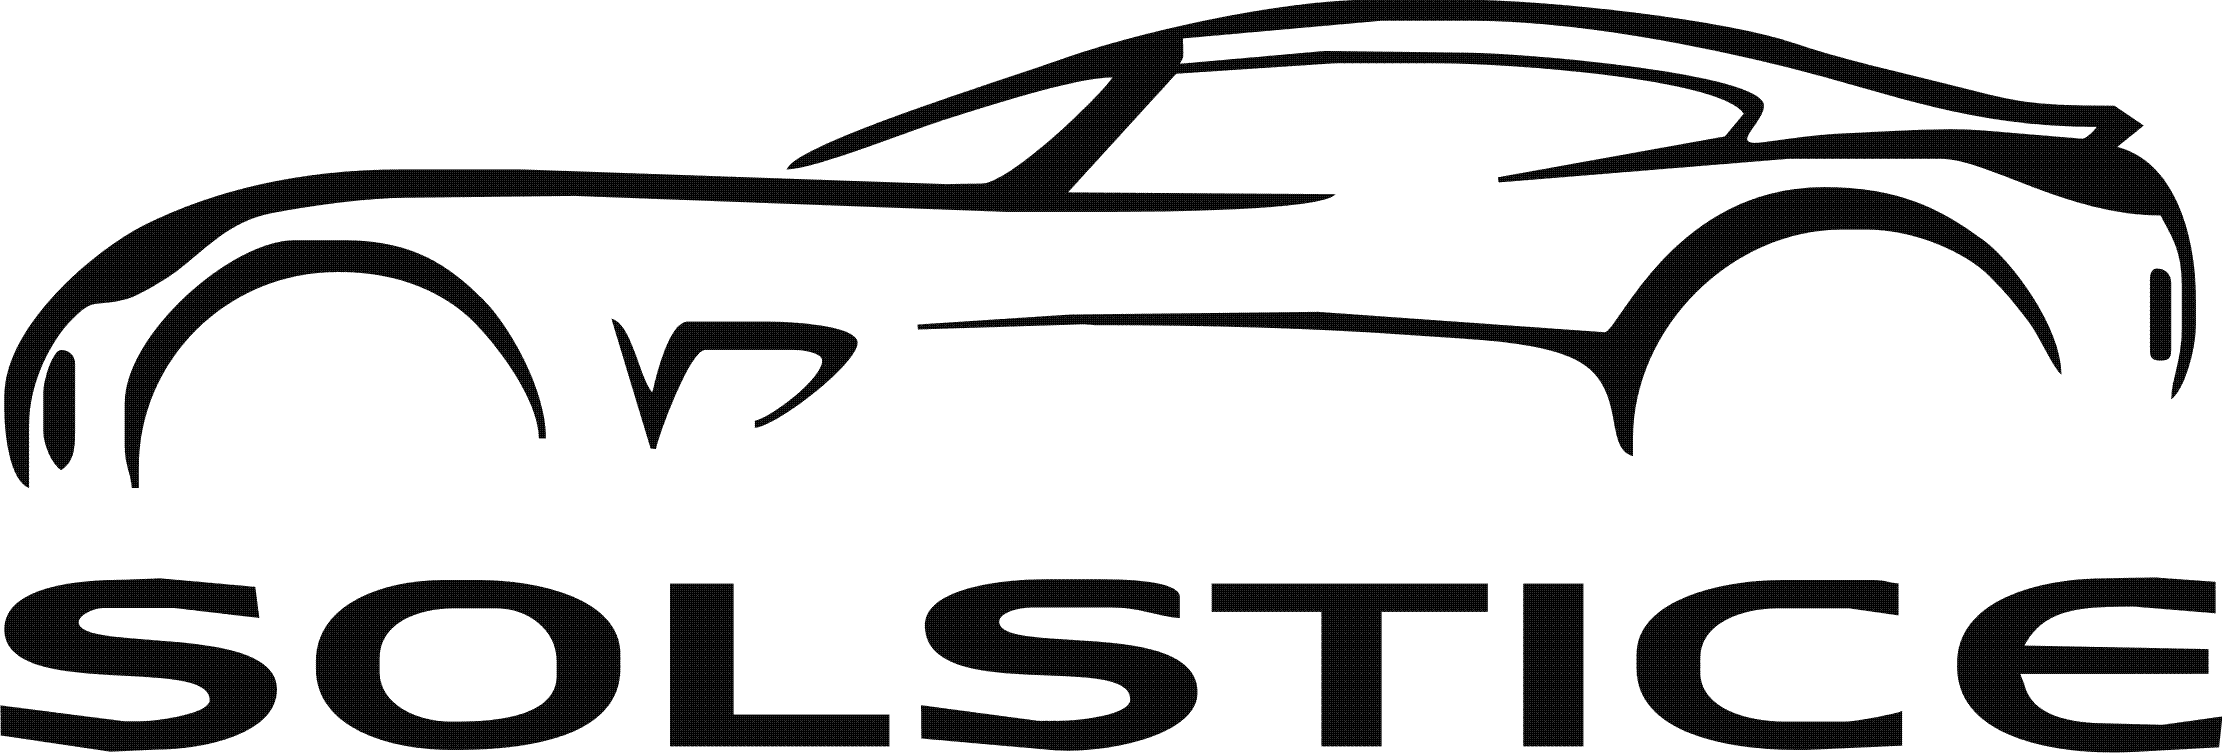 Free car outline clipart